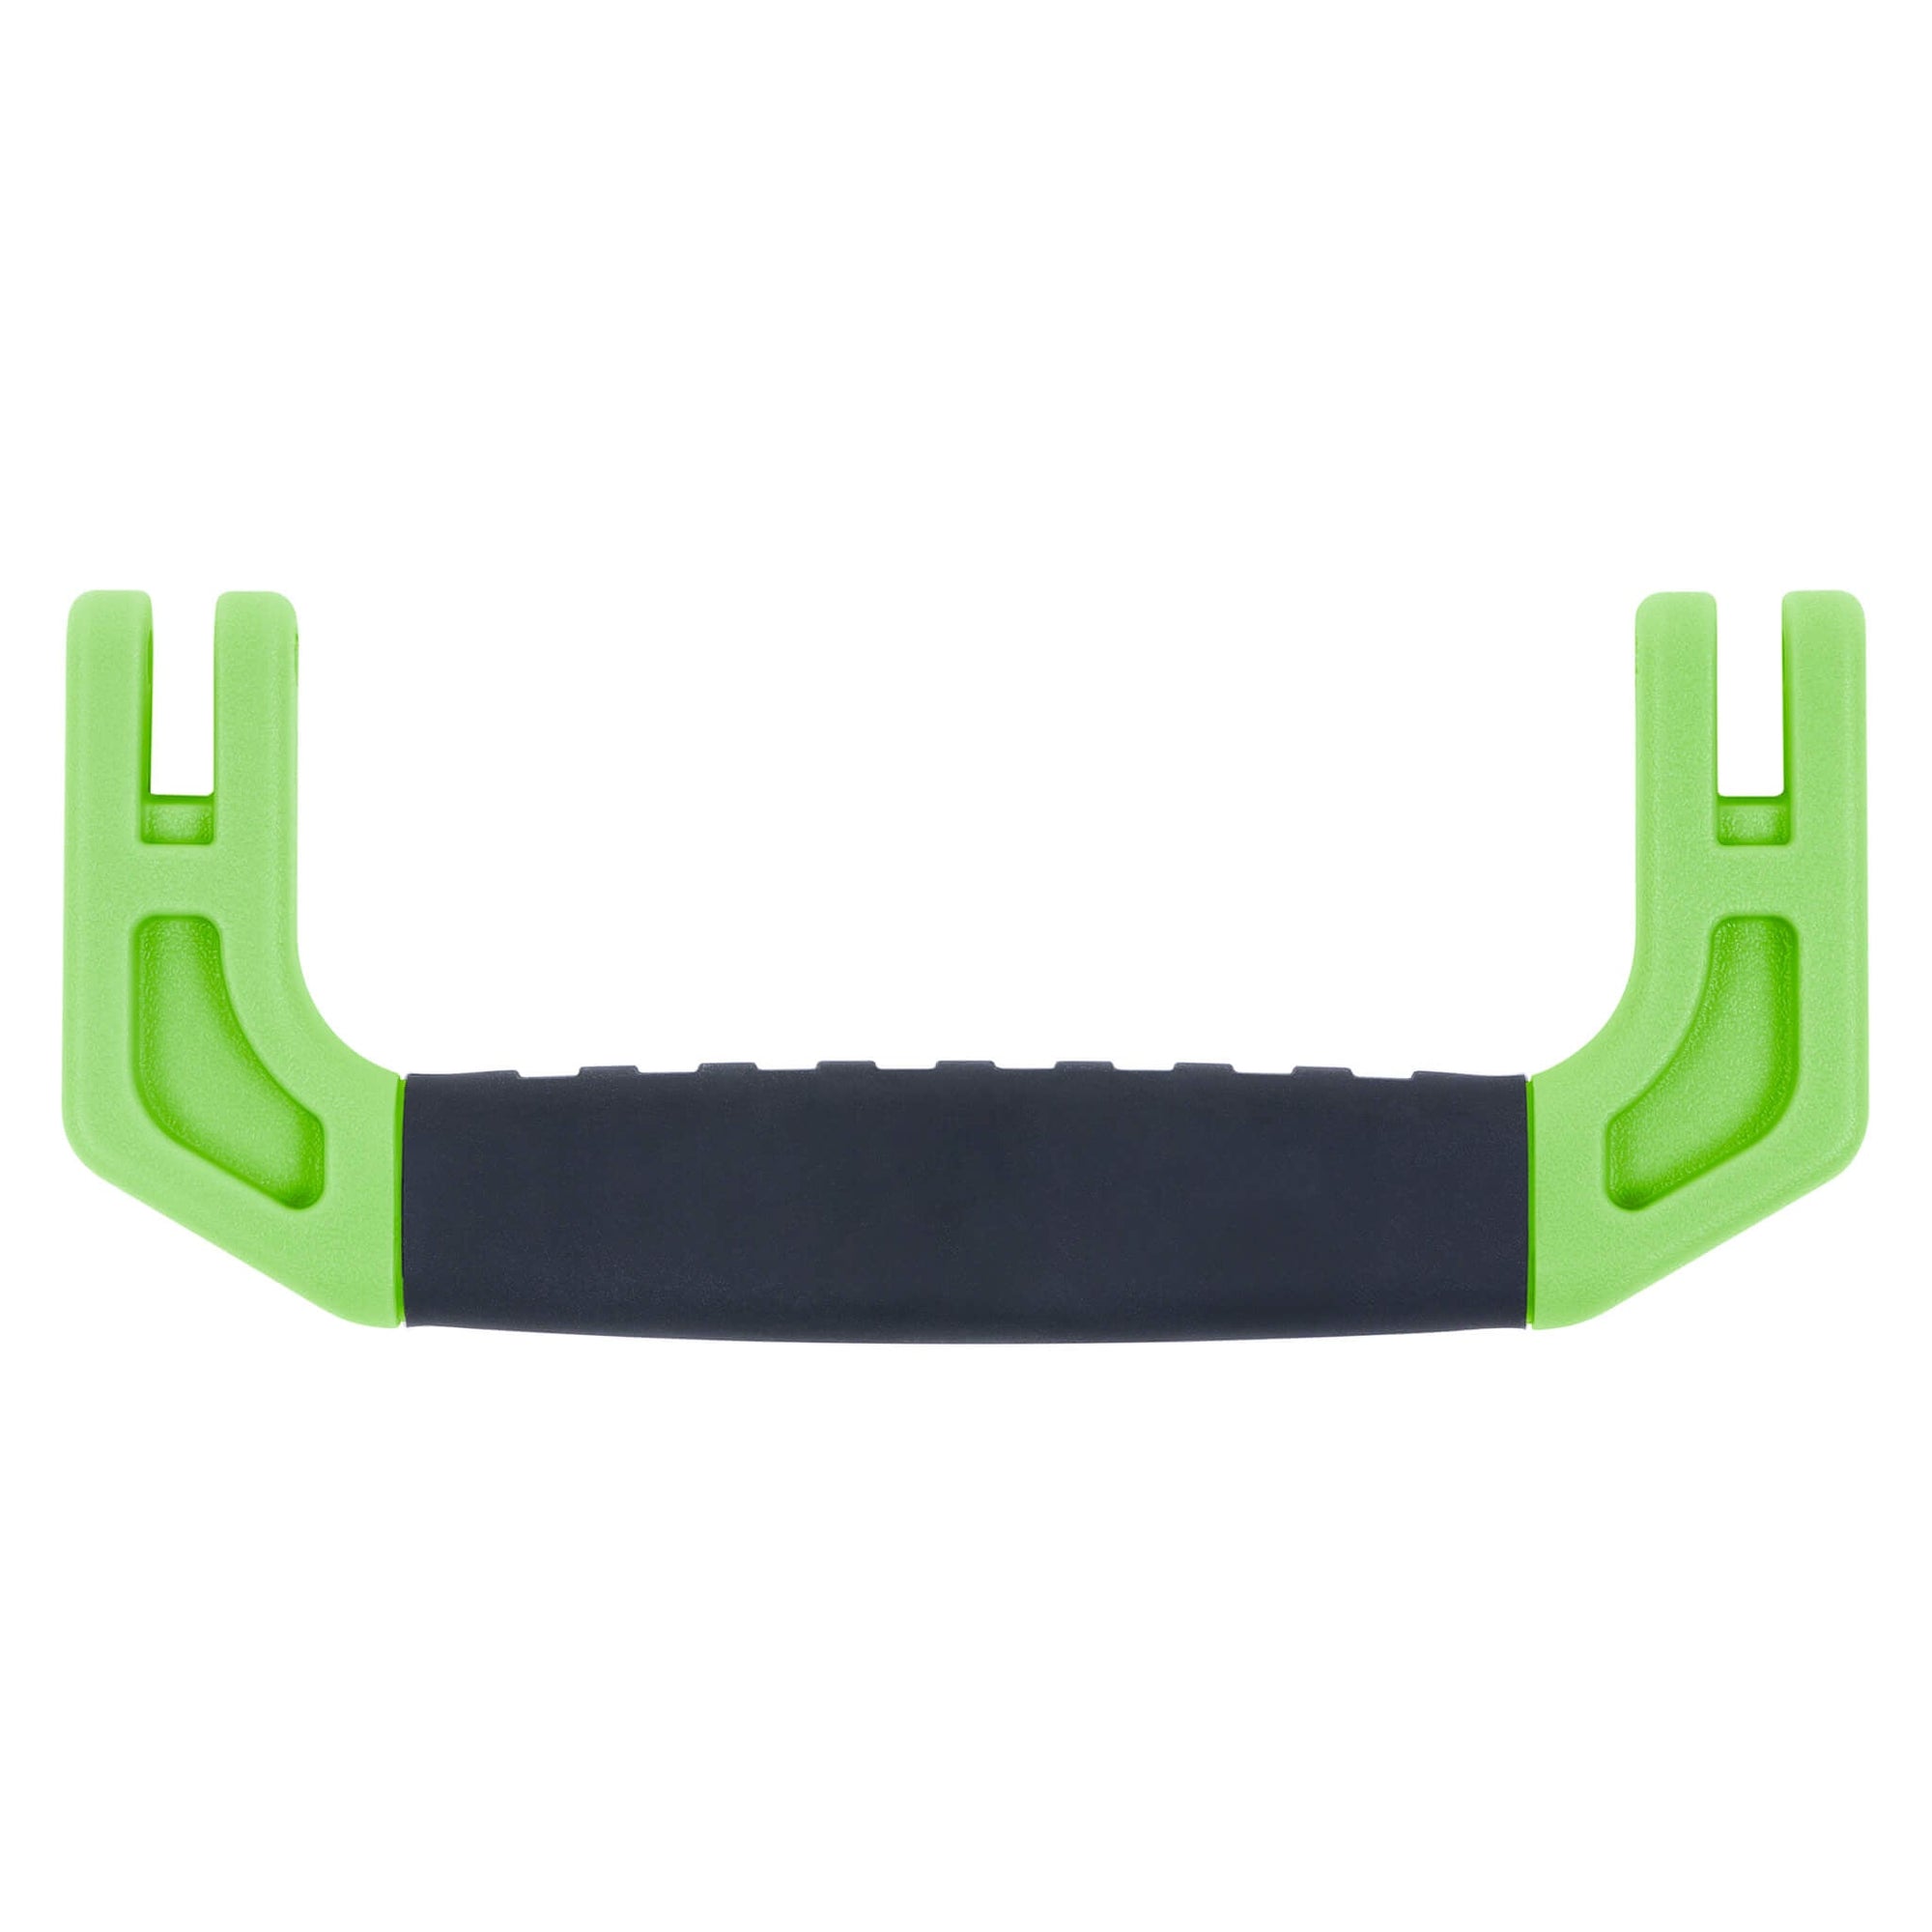 Pelican 1535 Air Rubber Overmolded Replacement Top Handle, Lime Green ColorCase 